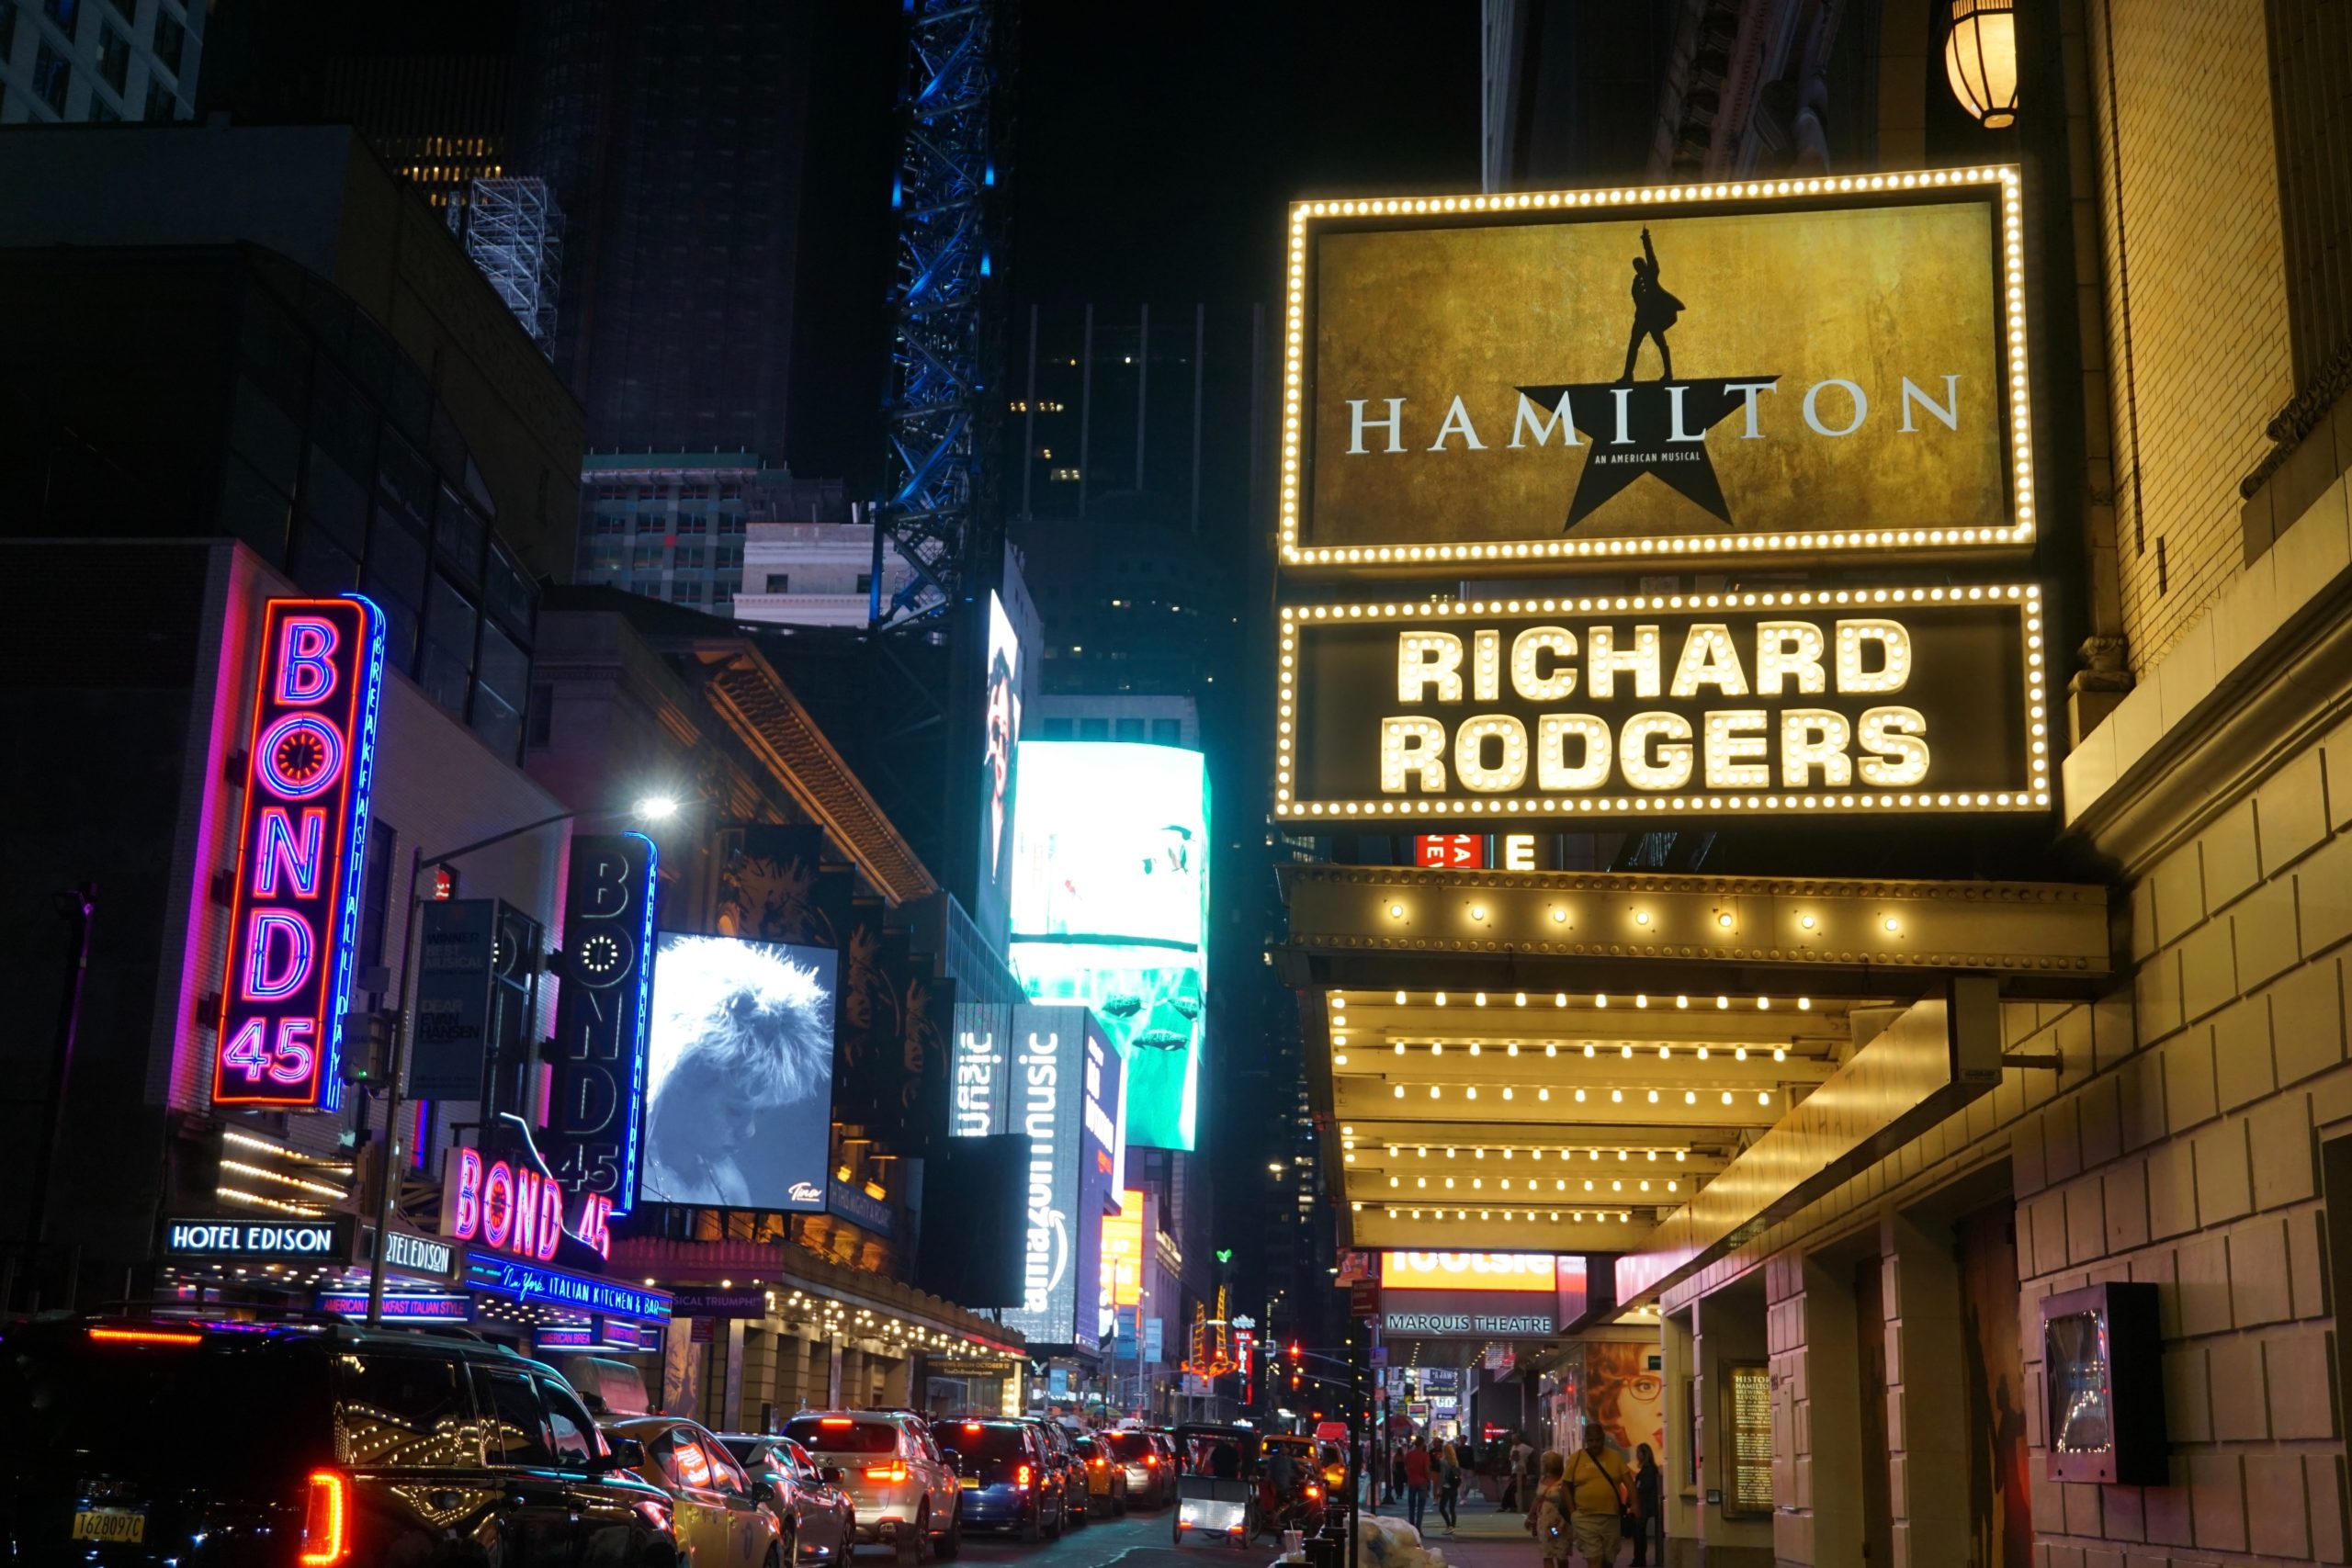 The exterior of the Richard Rodgers theatre where the musical “Hamilton is performed.”